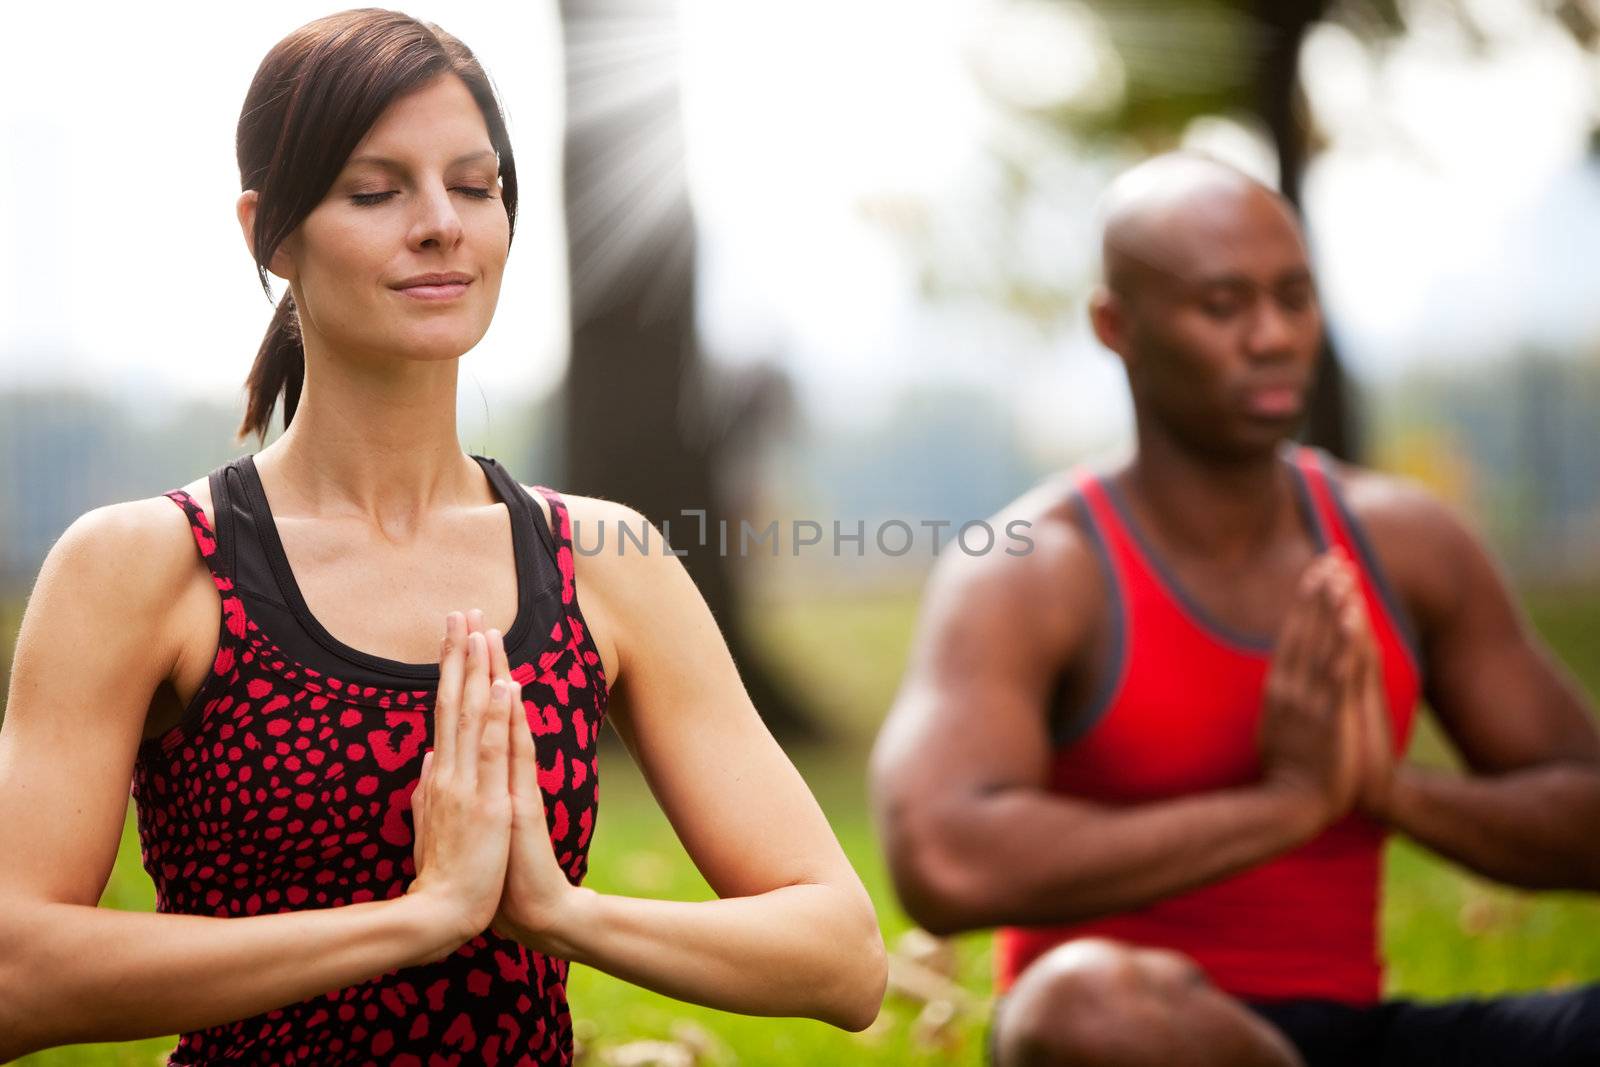 A group of people peacefully meditating in a park